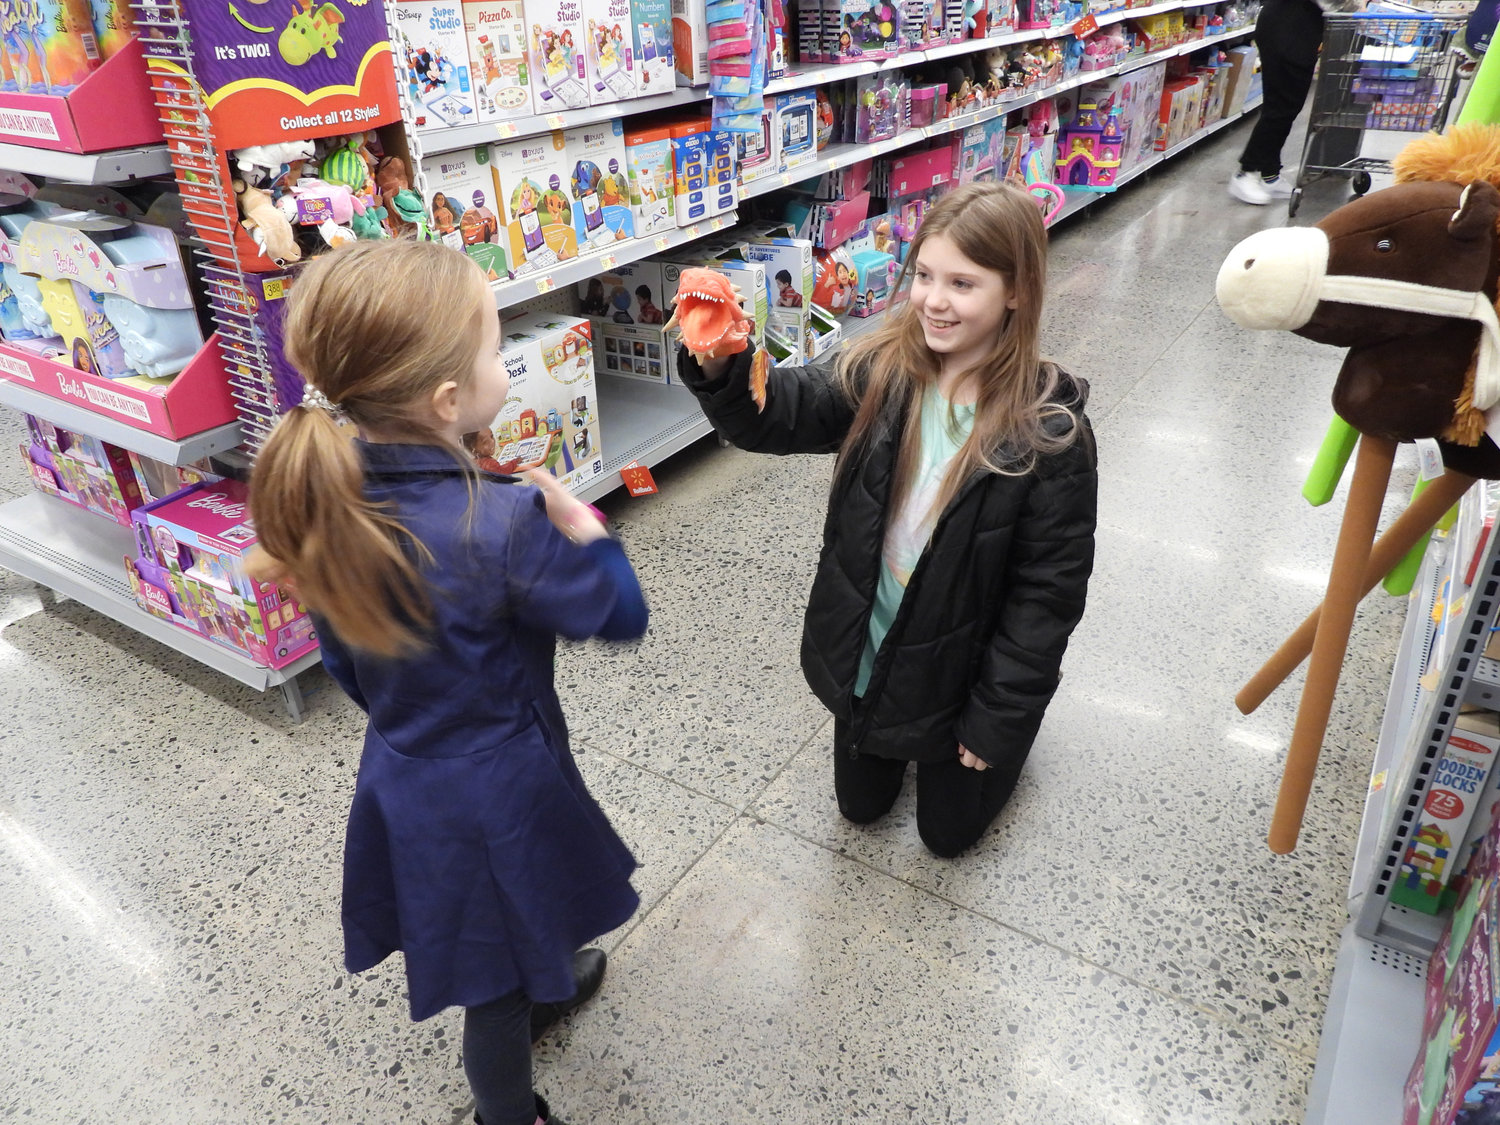 Ashlee Shanahan, 9, of Munnsville, plays with six-year-old Eliana Gates during the Madison County Shop with a Sheriff event on Saturday, Dec. 3